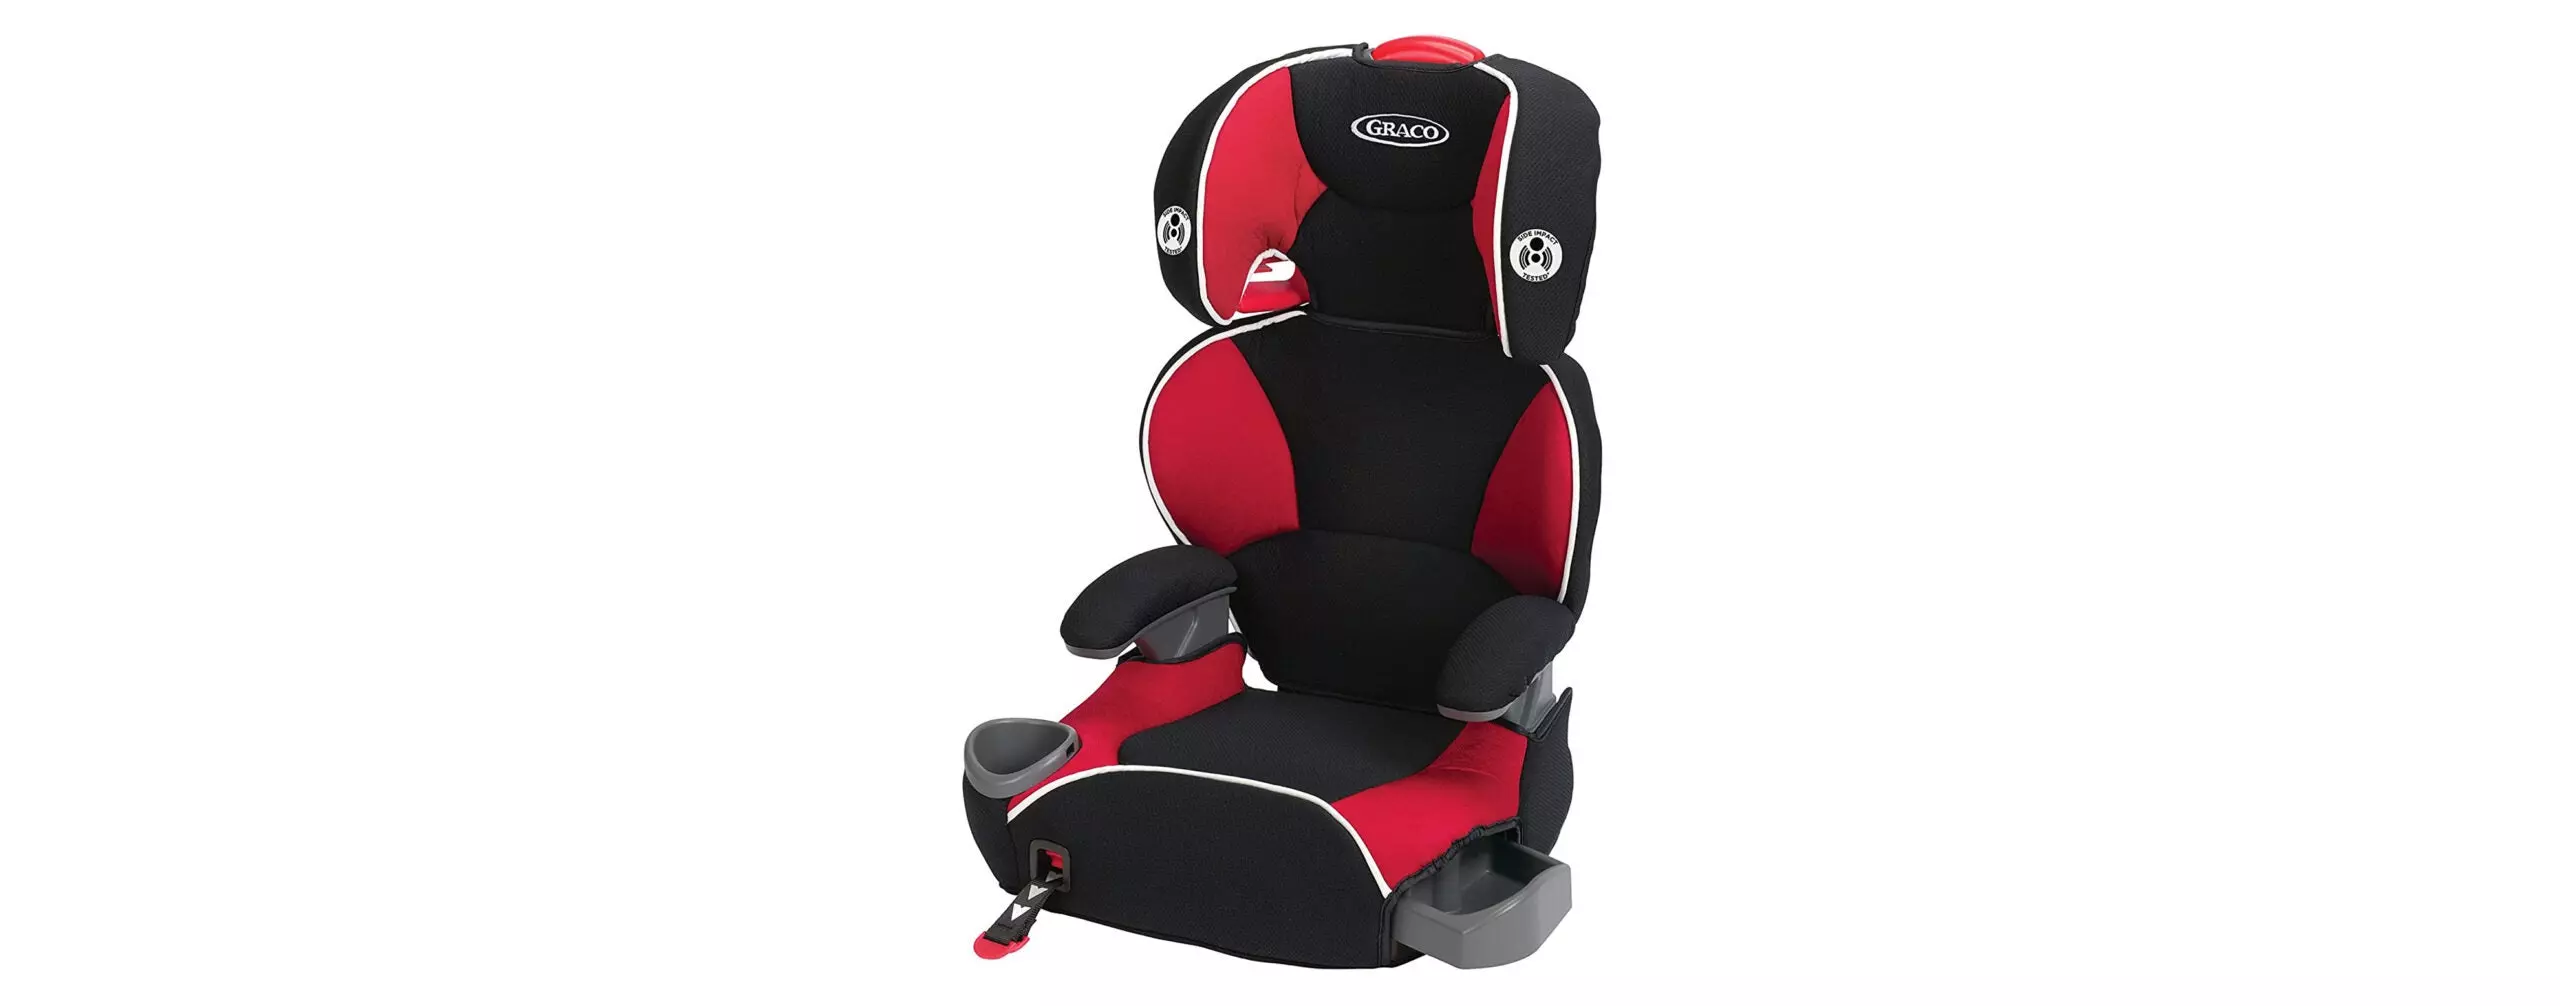 The Best Car Seat For 3-Year-Olds (Review and Buying Guide) in 2022